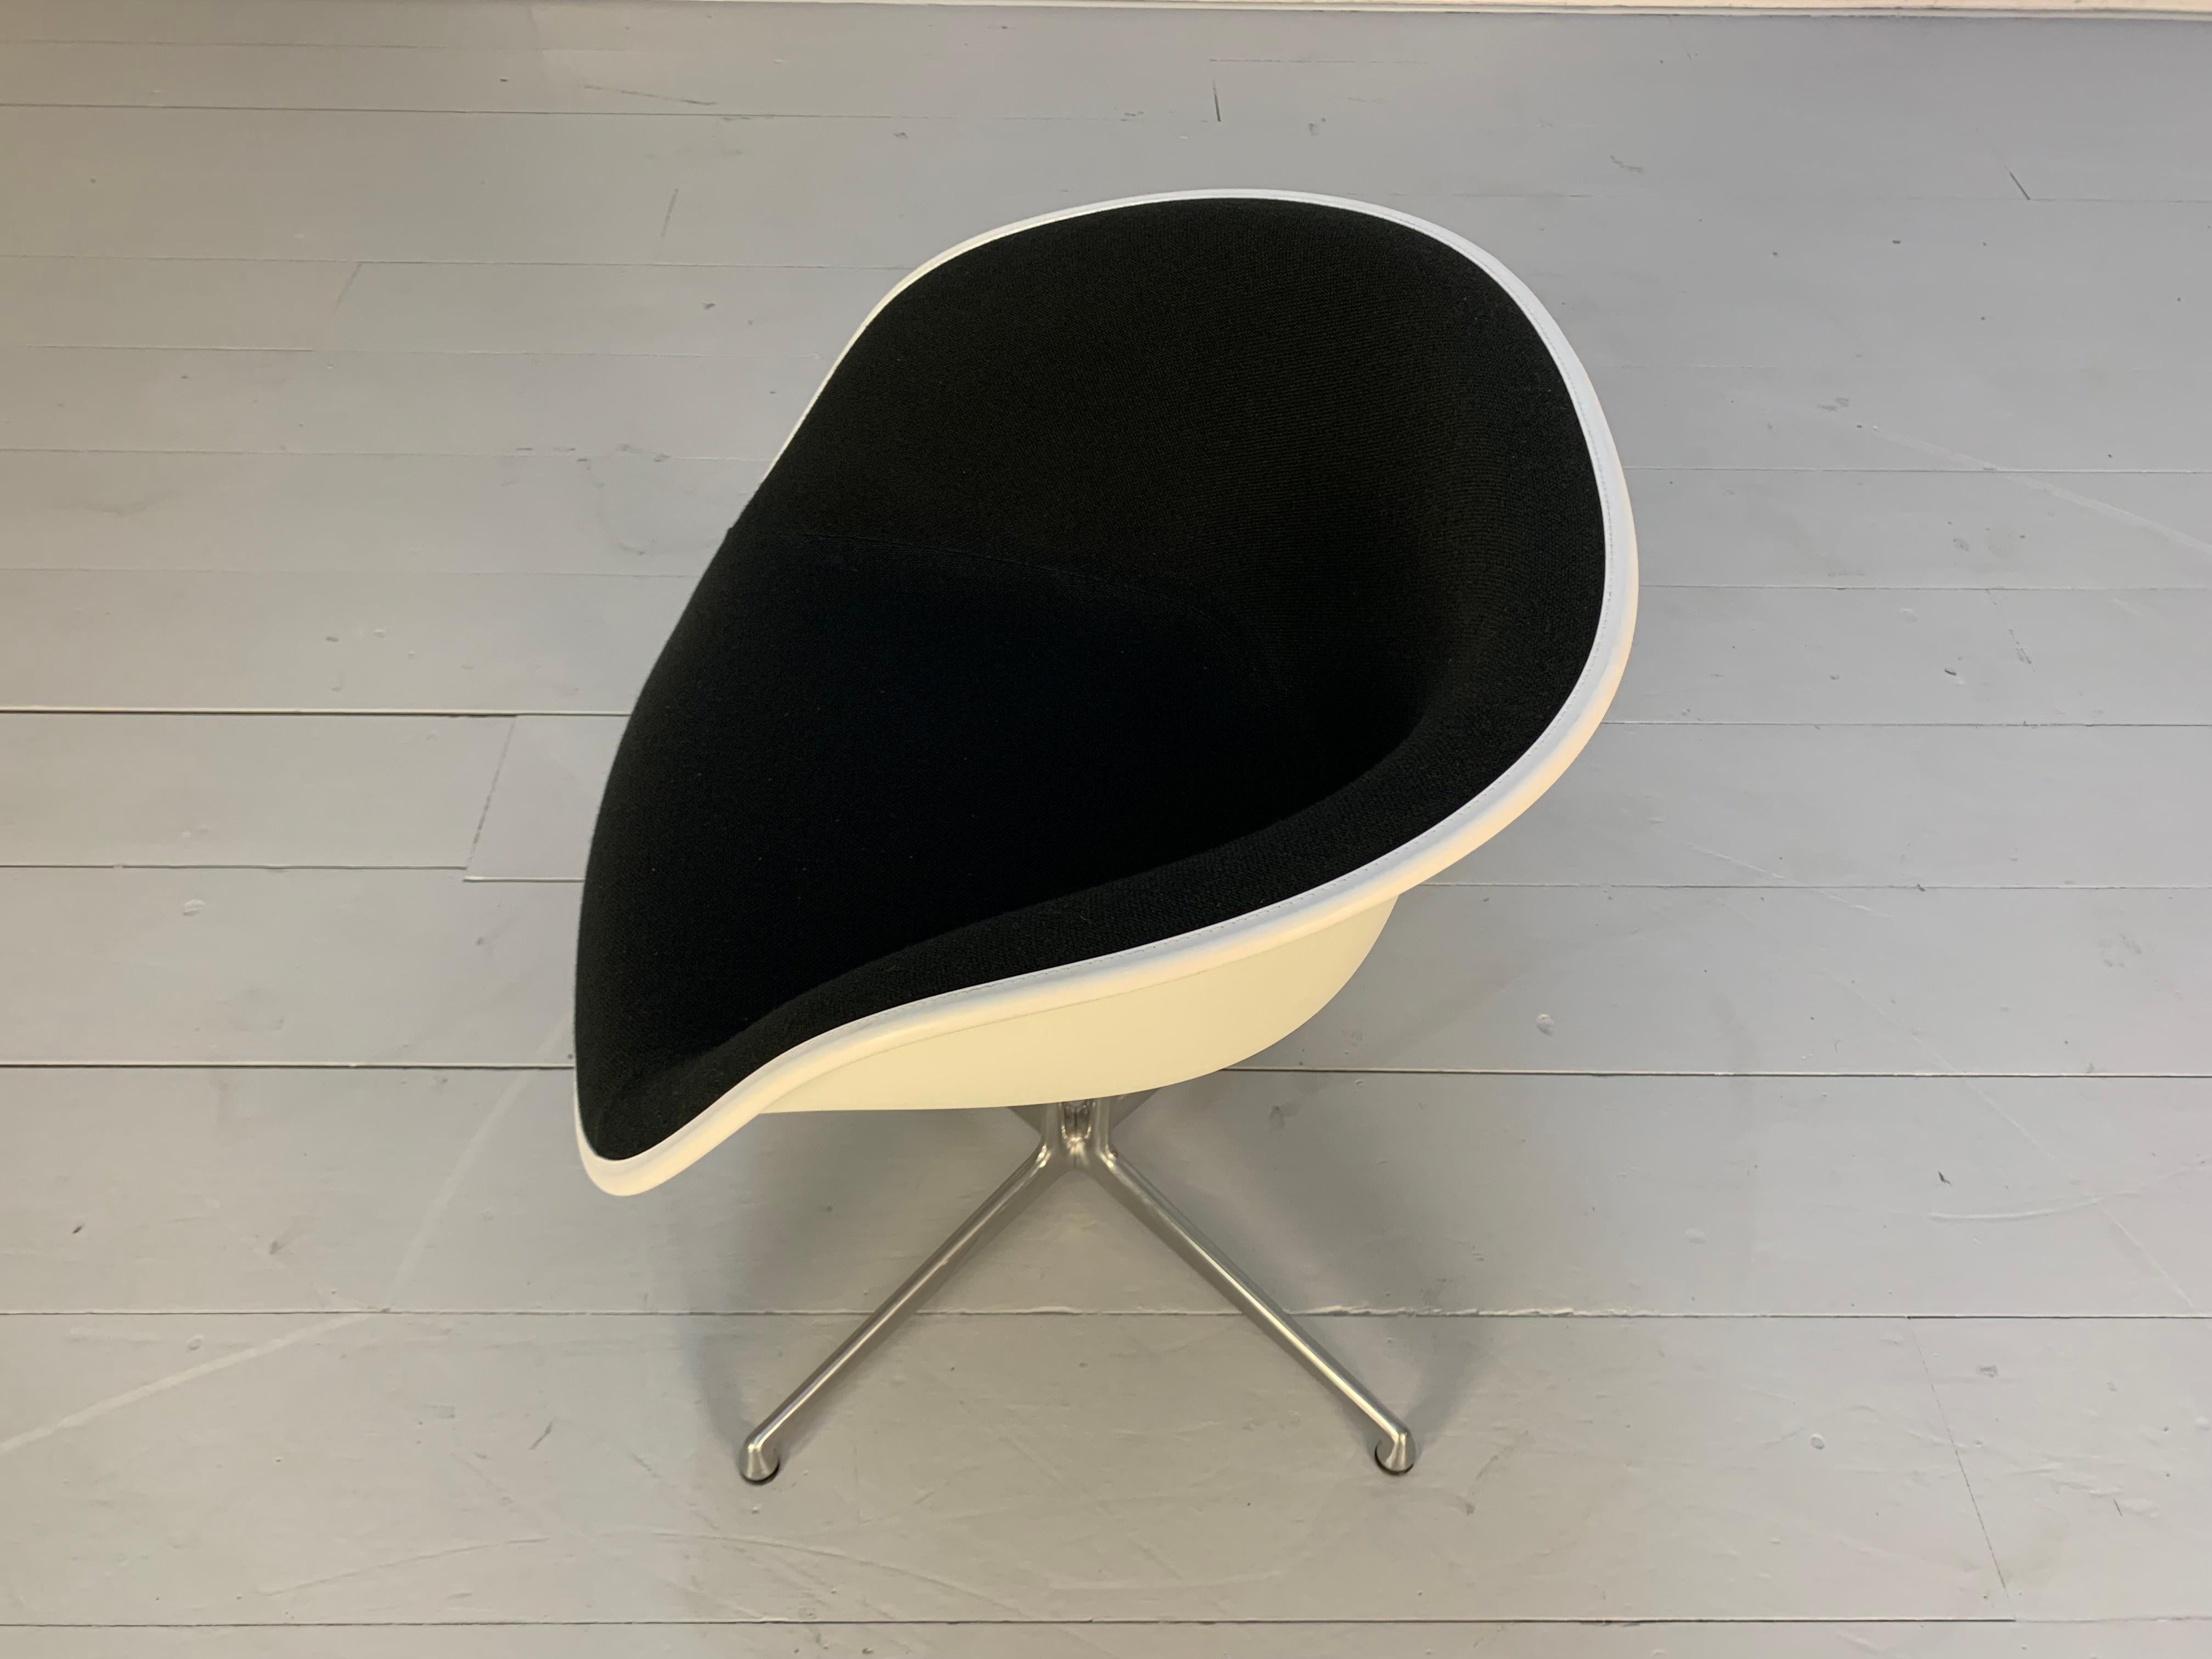 Vitra “La Fonda” Eames Chair & Marble Table in Black Hopsack For Sale 9